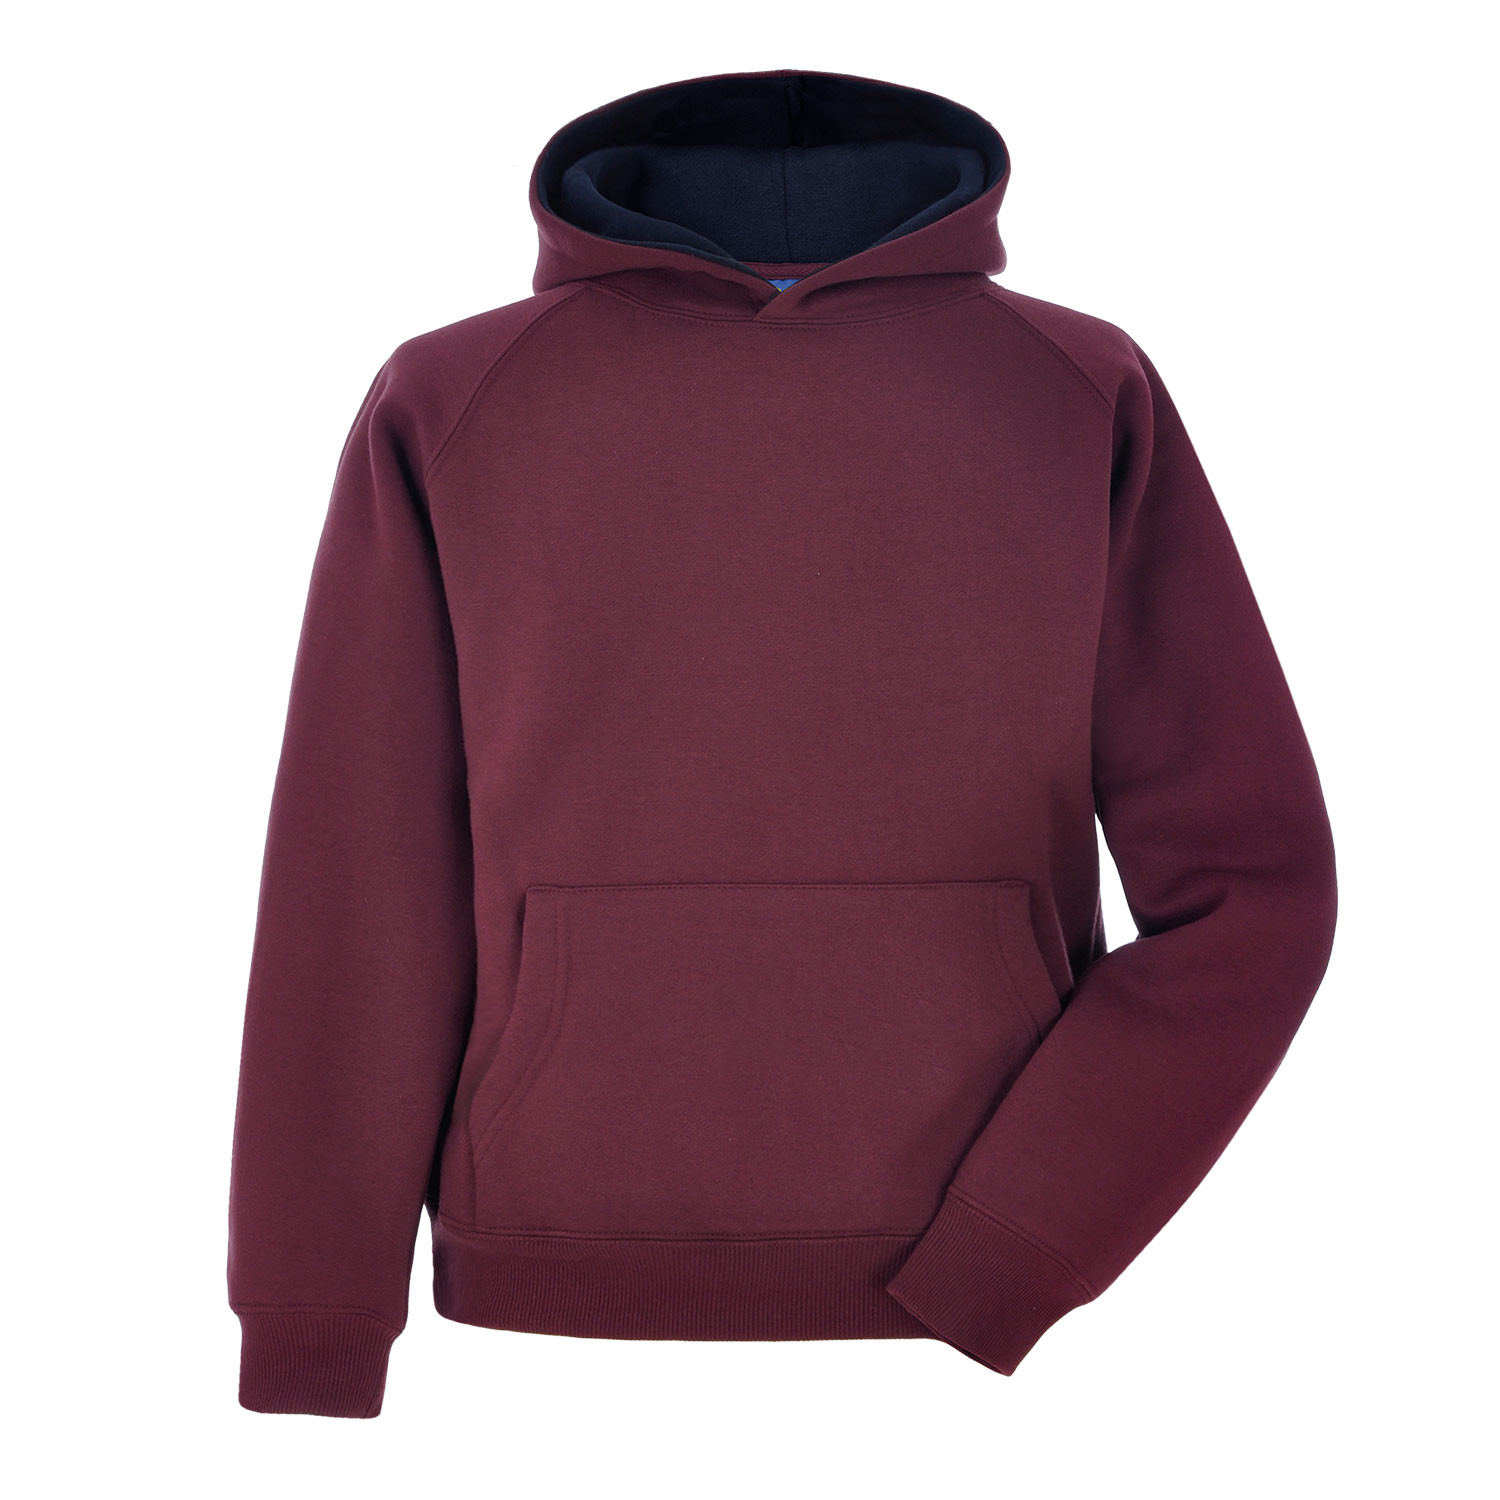 Burgundy Hooded Top with Logo - Age 11-13